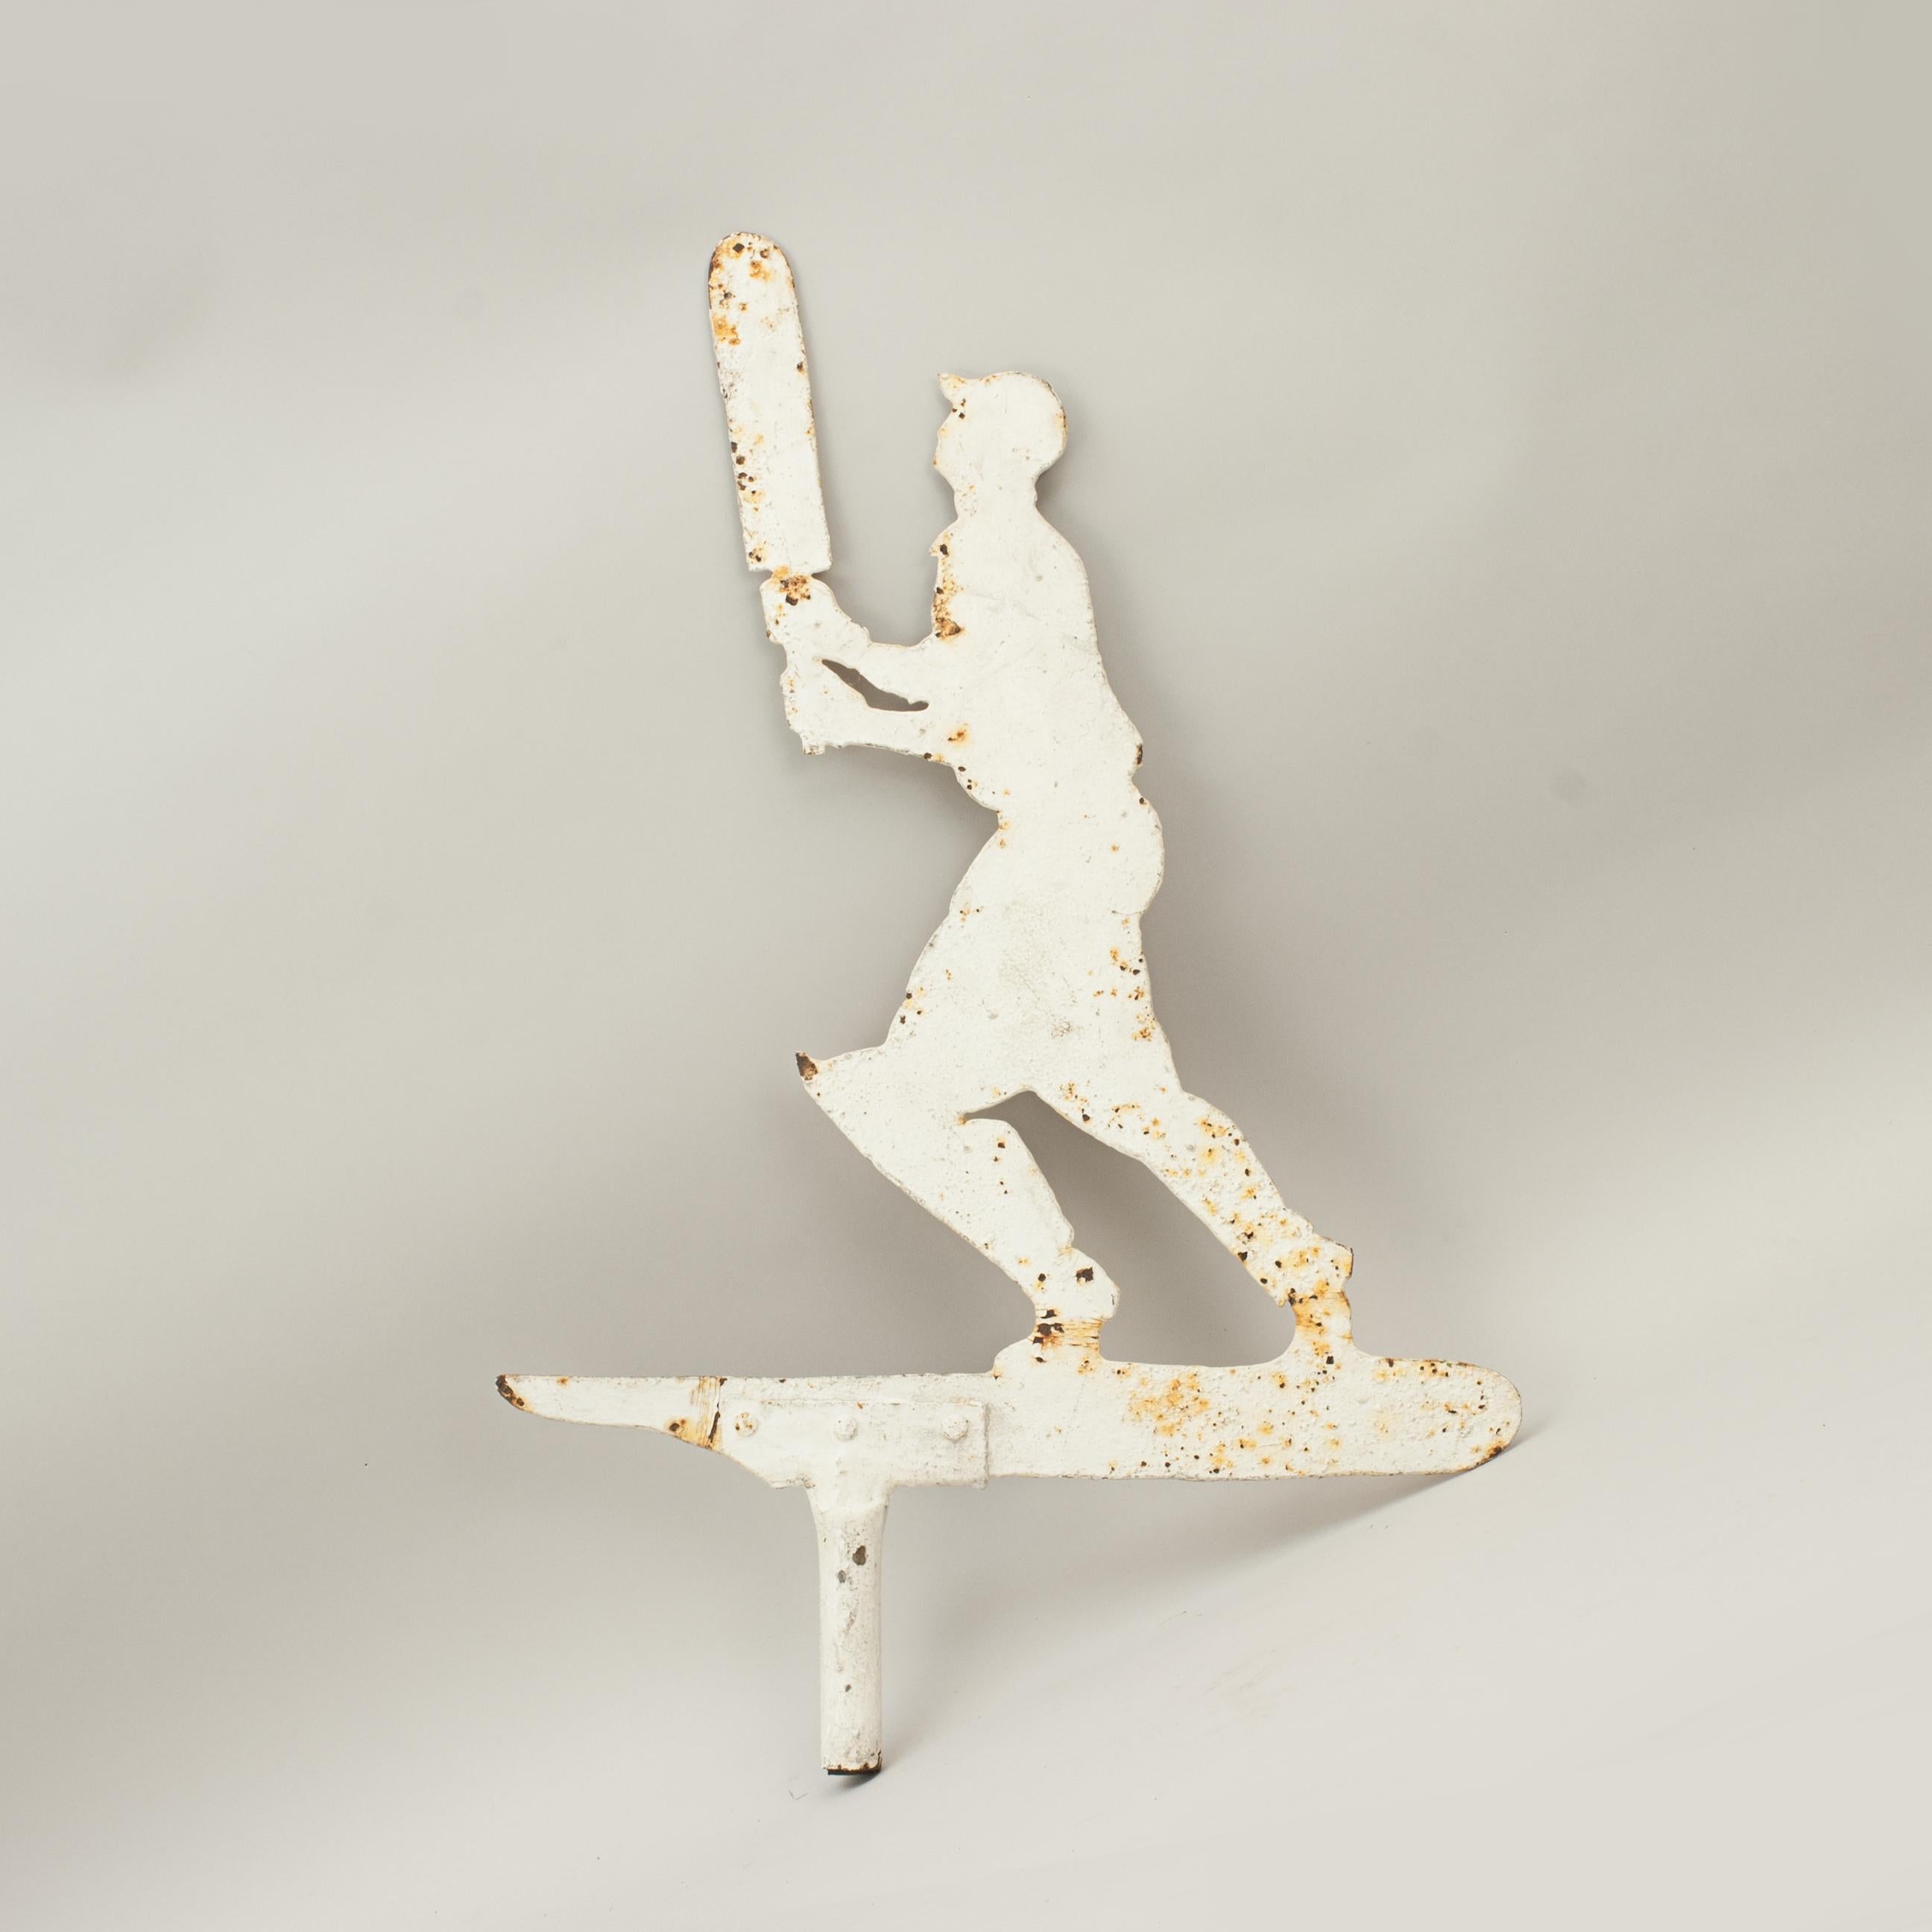 Cricket Batsman Weather vane.
A fine weathervane in the shape of a cricketer, batsman with pads and cricket bat. The cricketer has been mounted onto a turned circular ebonized wooden base. It could easily be reinstalled as a working weather